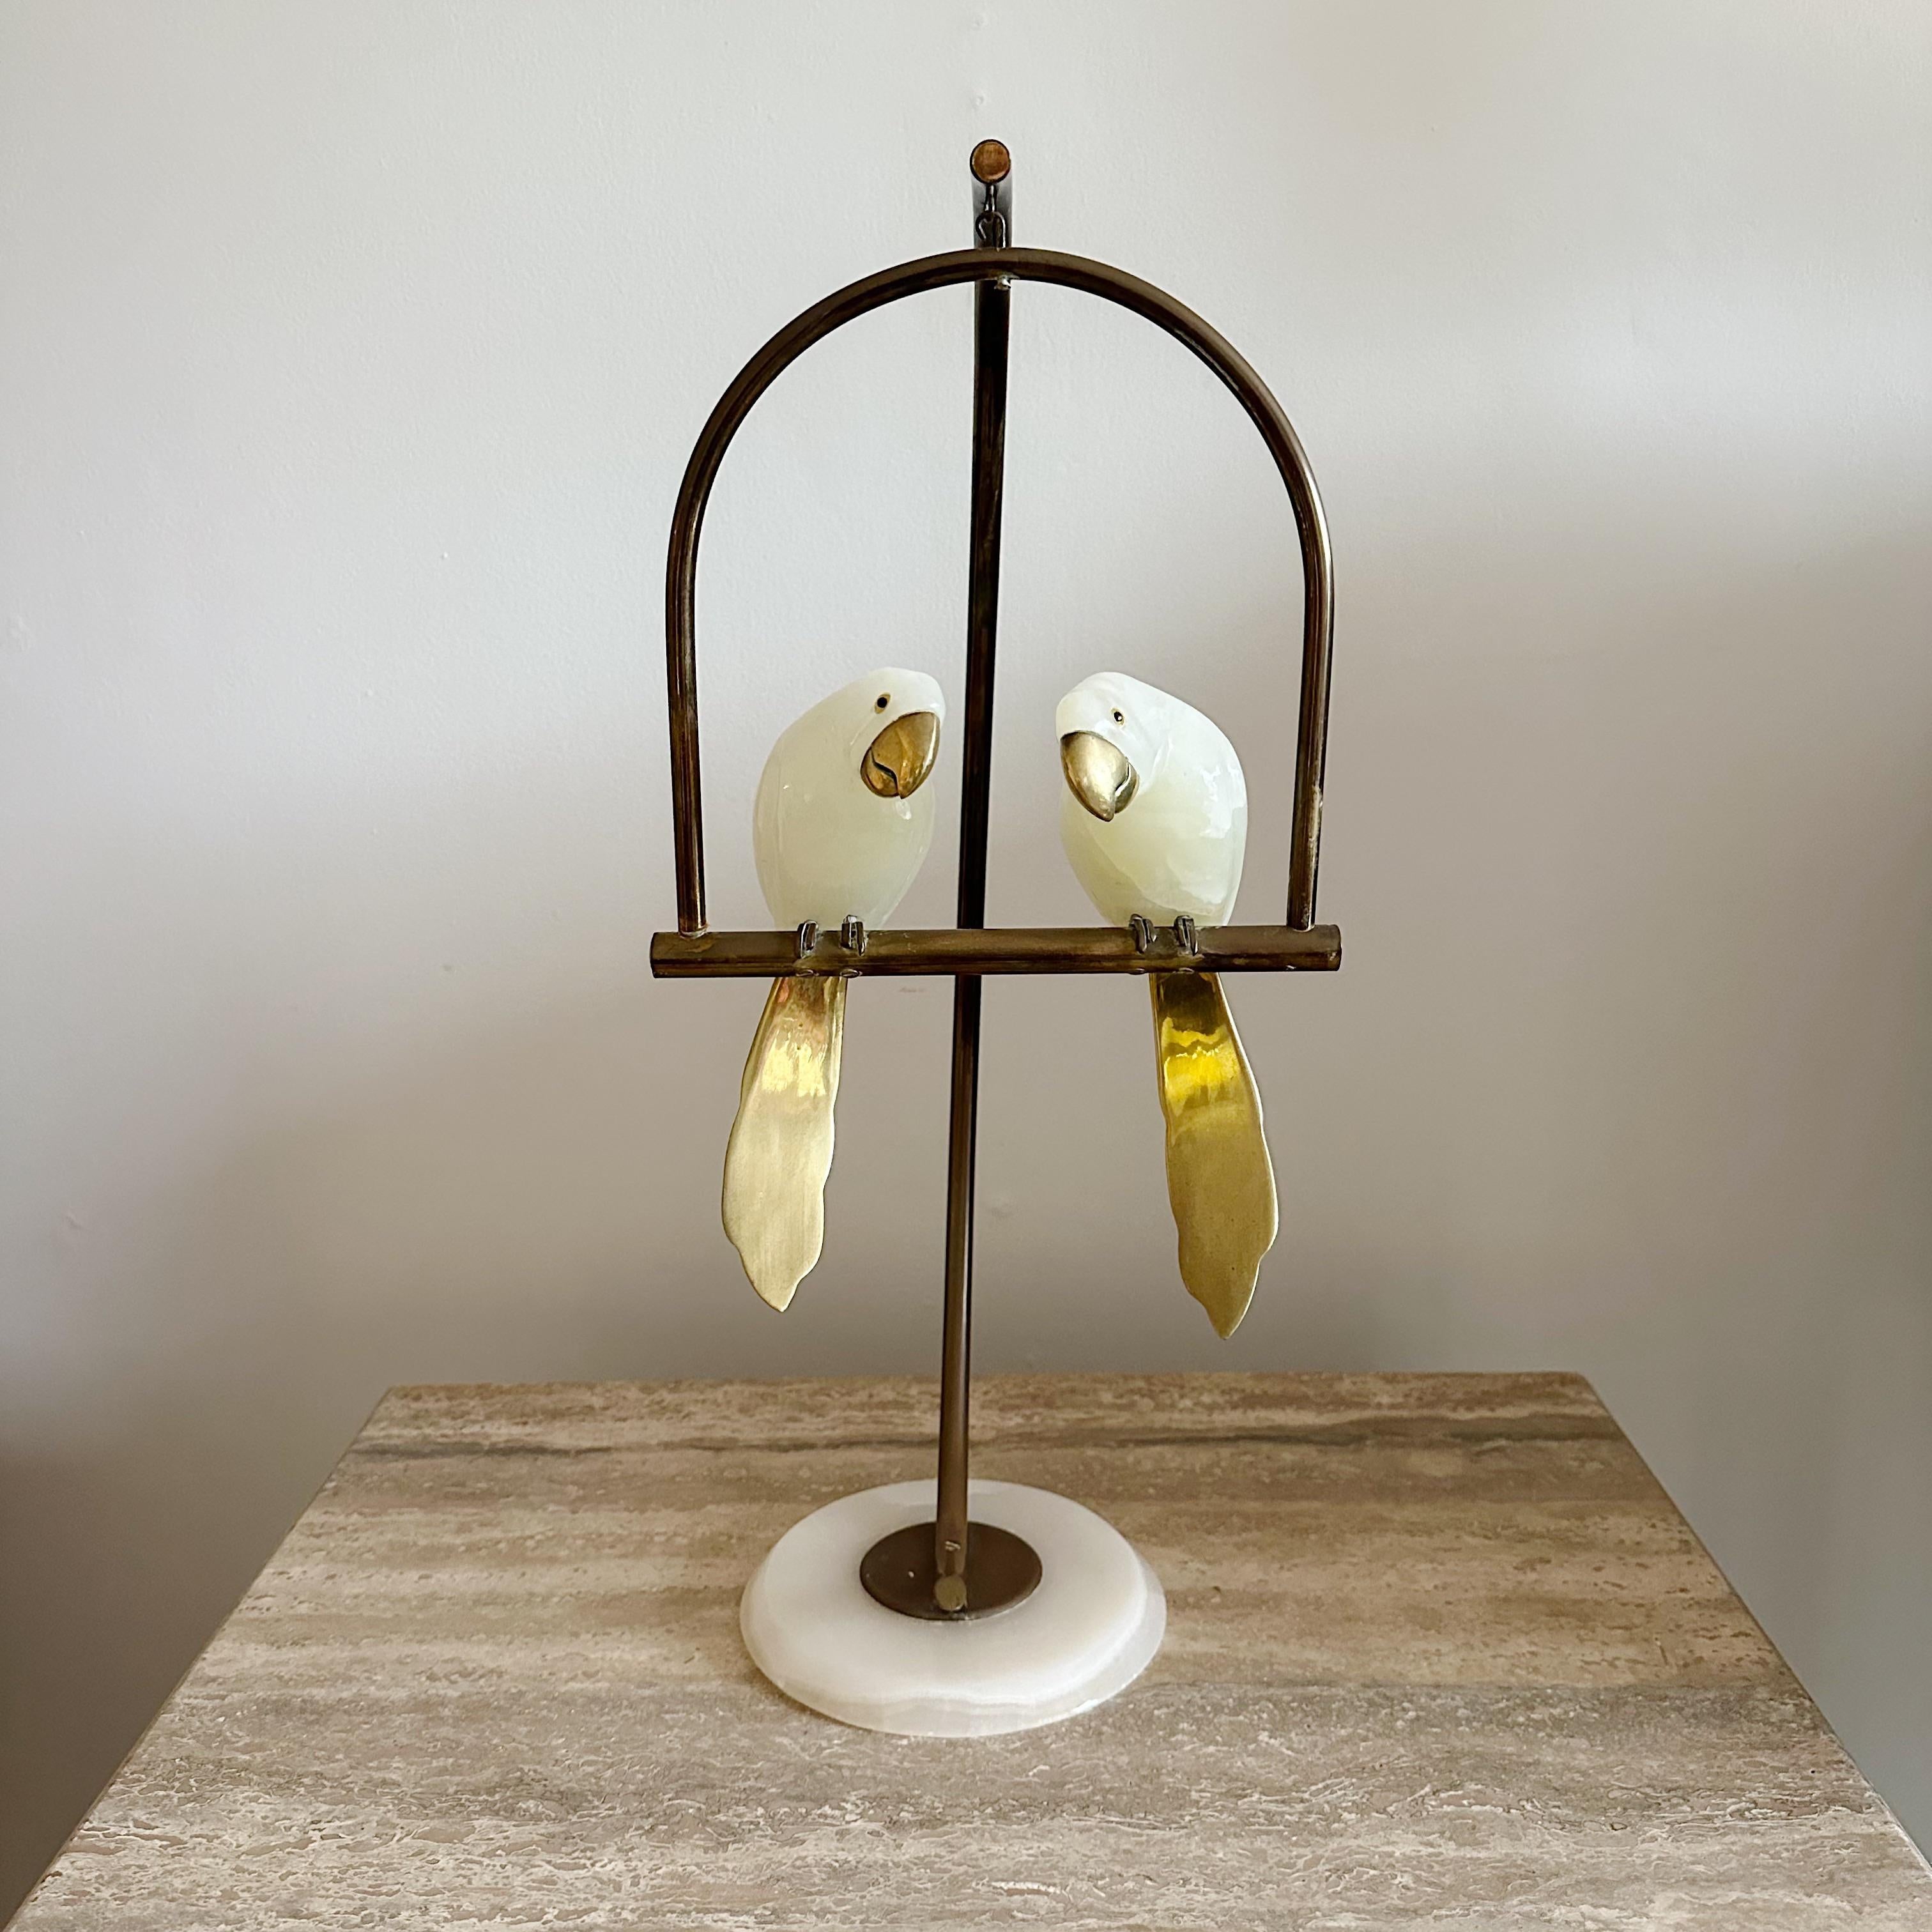 Sculpture of a pair of intricately carved white onyx bird from the 1960s on Brass stand. The sculpture depicts two birds with brass beaks and brass tails, perched on a brass swing, adding a playful touch to the classic design. The white onyx has